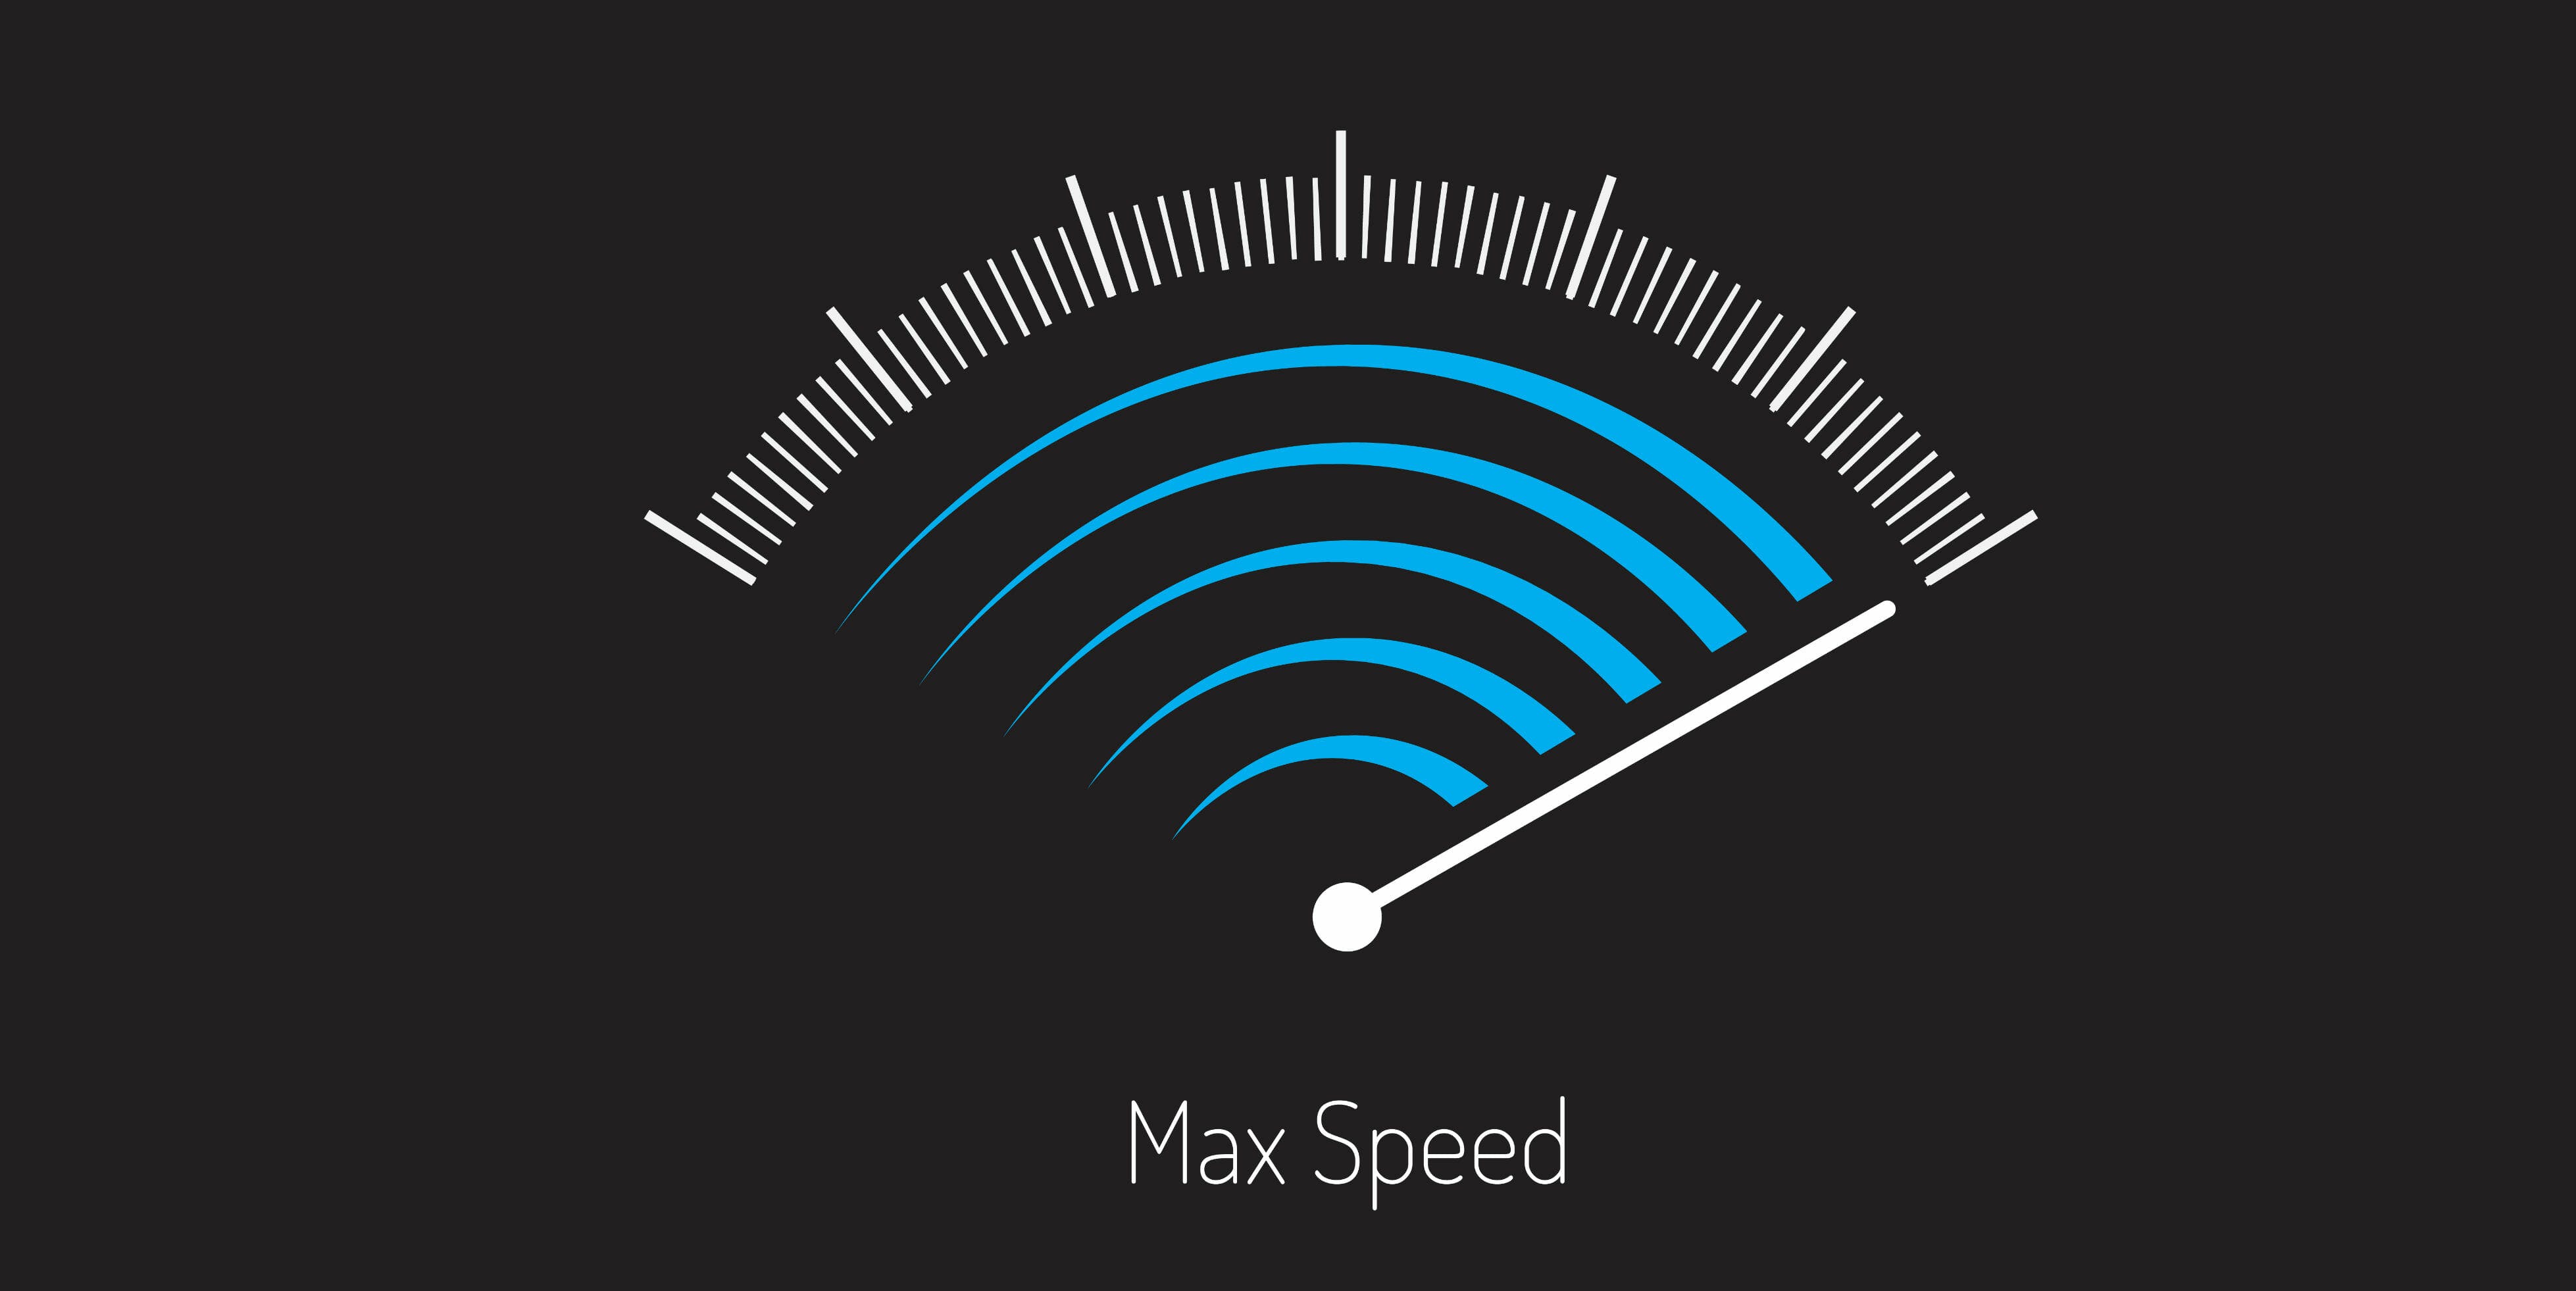 What is Considered Good Internet Speed?